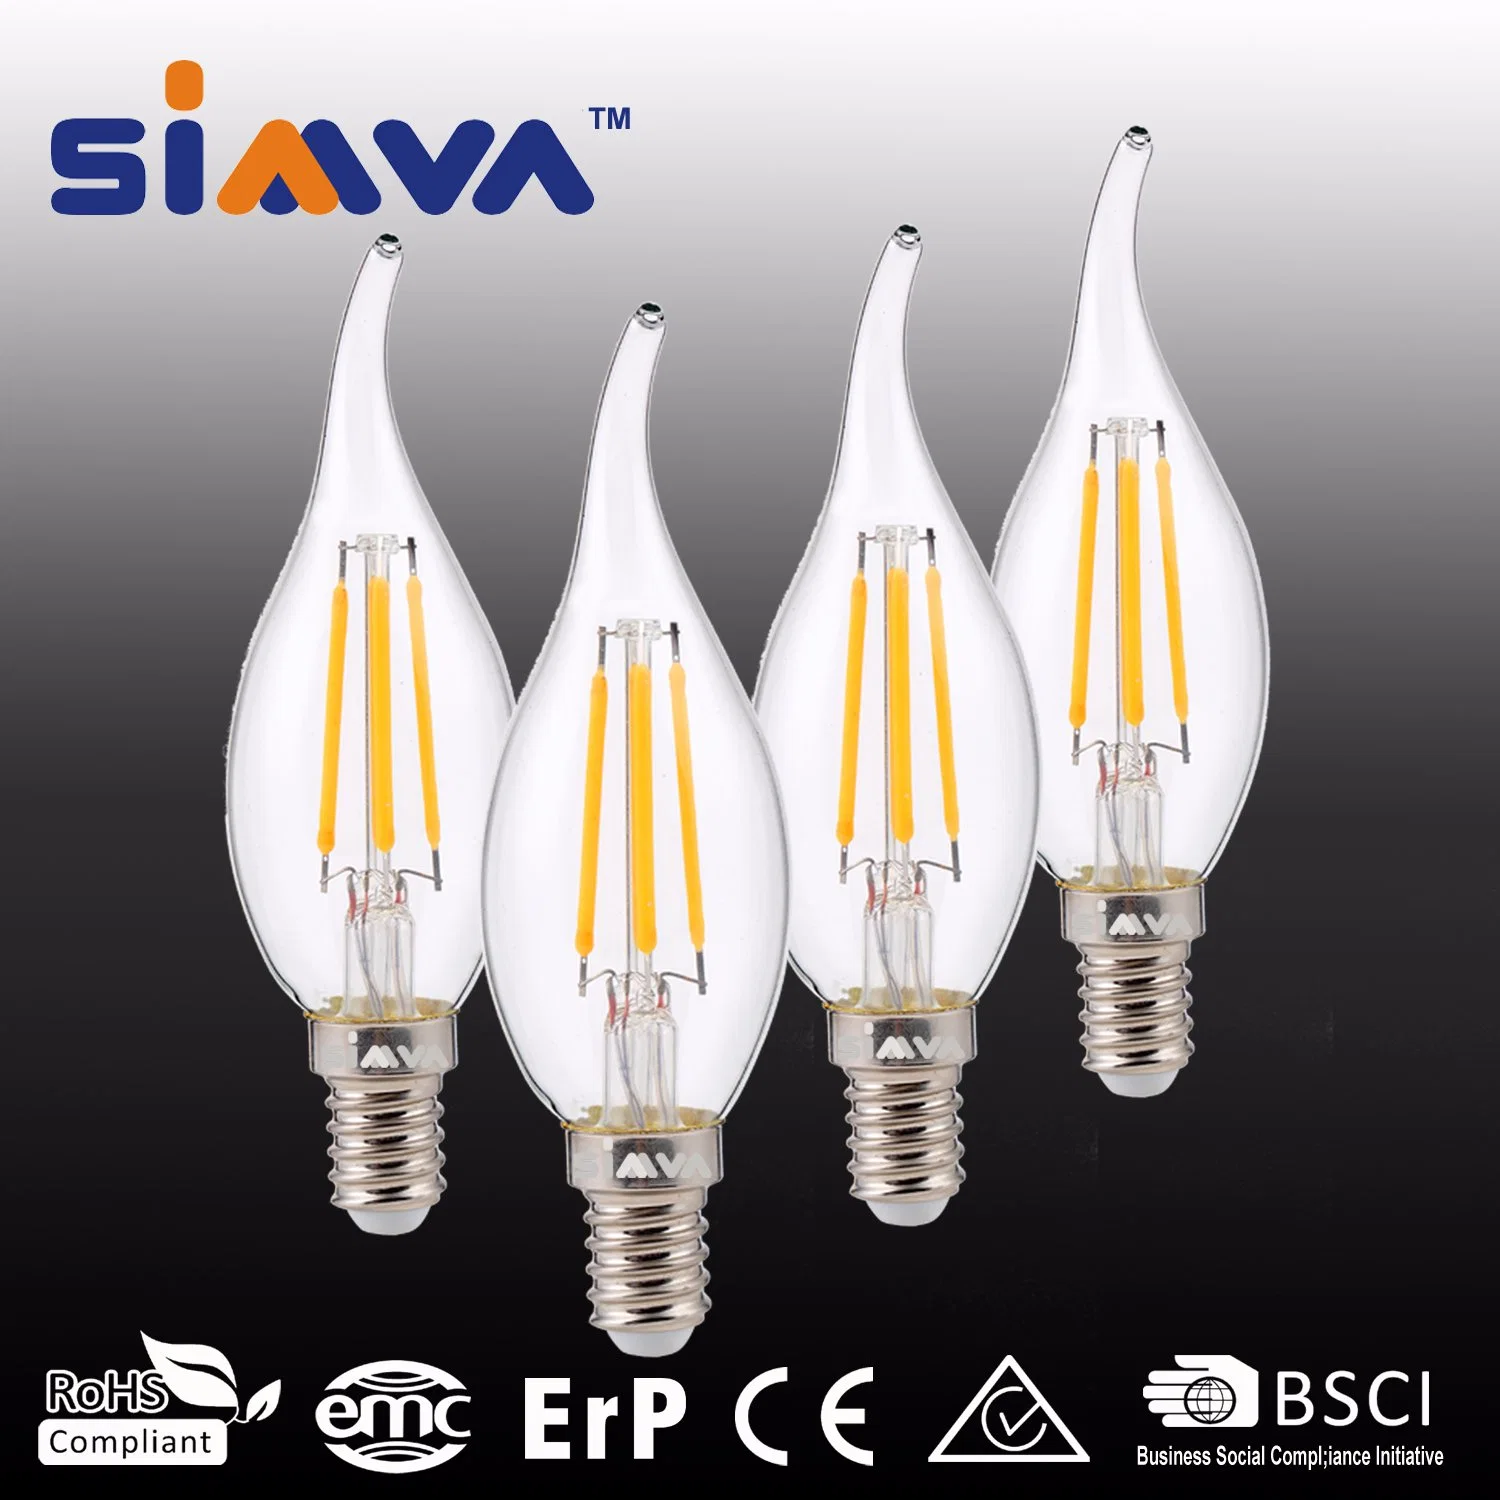 Hot Selling LED Bulb Candle 4W (40W Equivalent) 480lm 2200-6500K E14/E27 360degree LED Filament Bulb Lamp with CE Approved